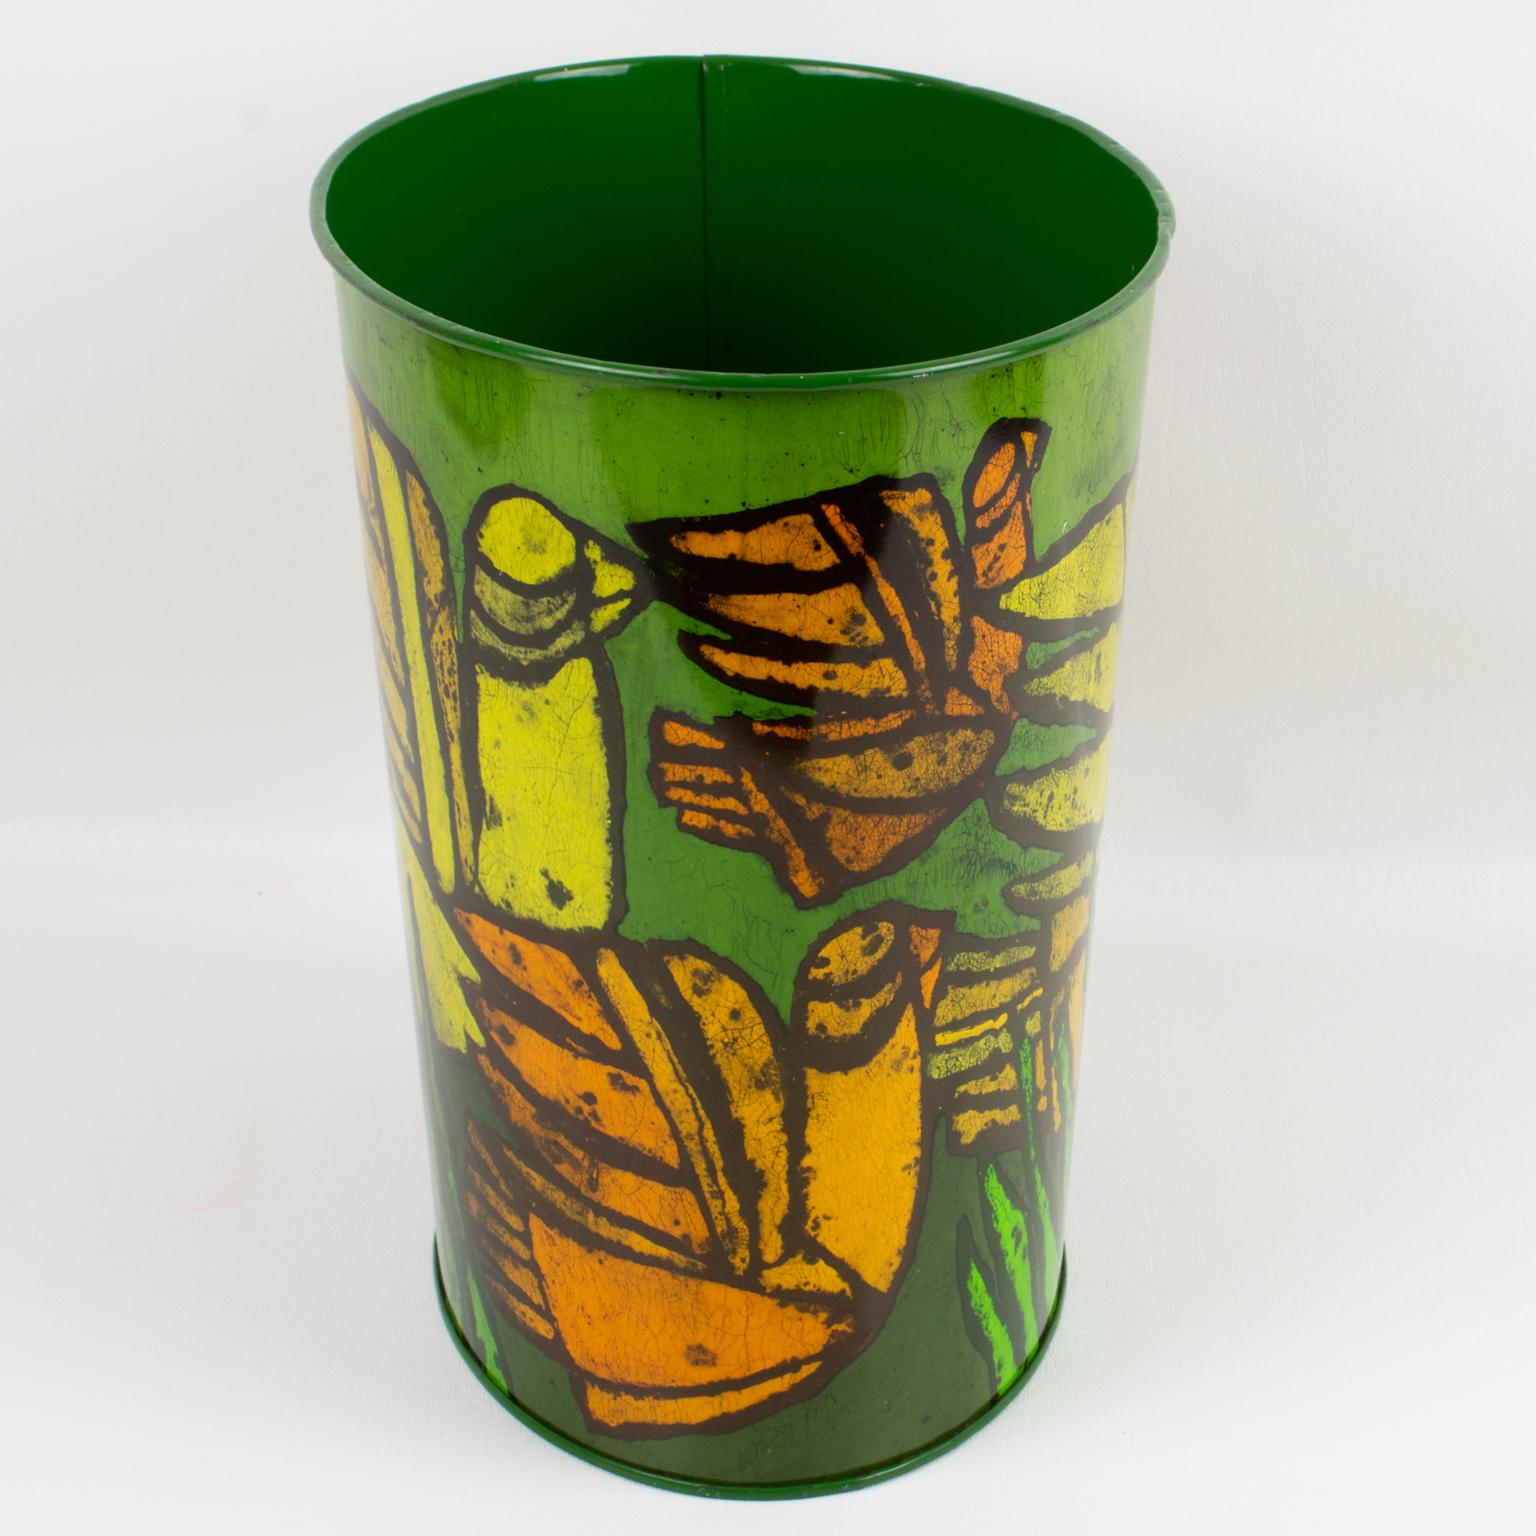 A functional 1960s Mid-Century-Modern desk accessory, office waste-basket designed by Tomado, Holland. Ovoid shape in a bright green metal and polychrome typical modernist design of exotic birds in yellow, black, and orange colors. Marking of